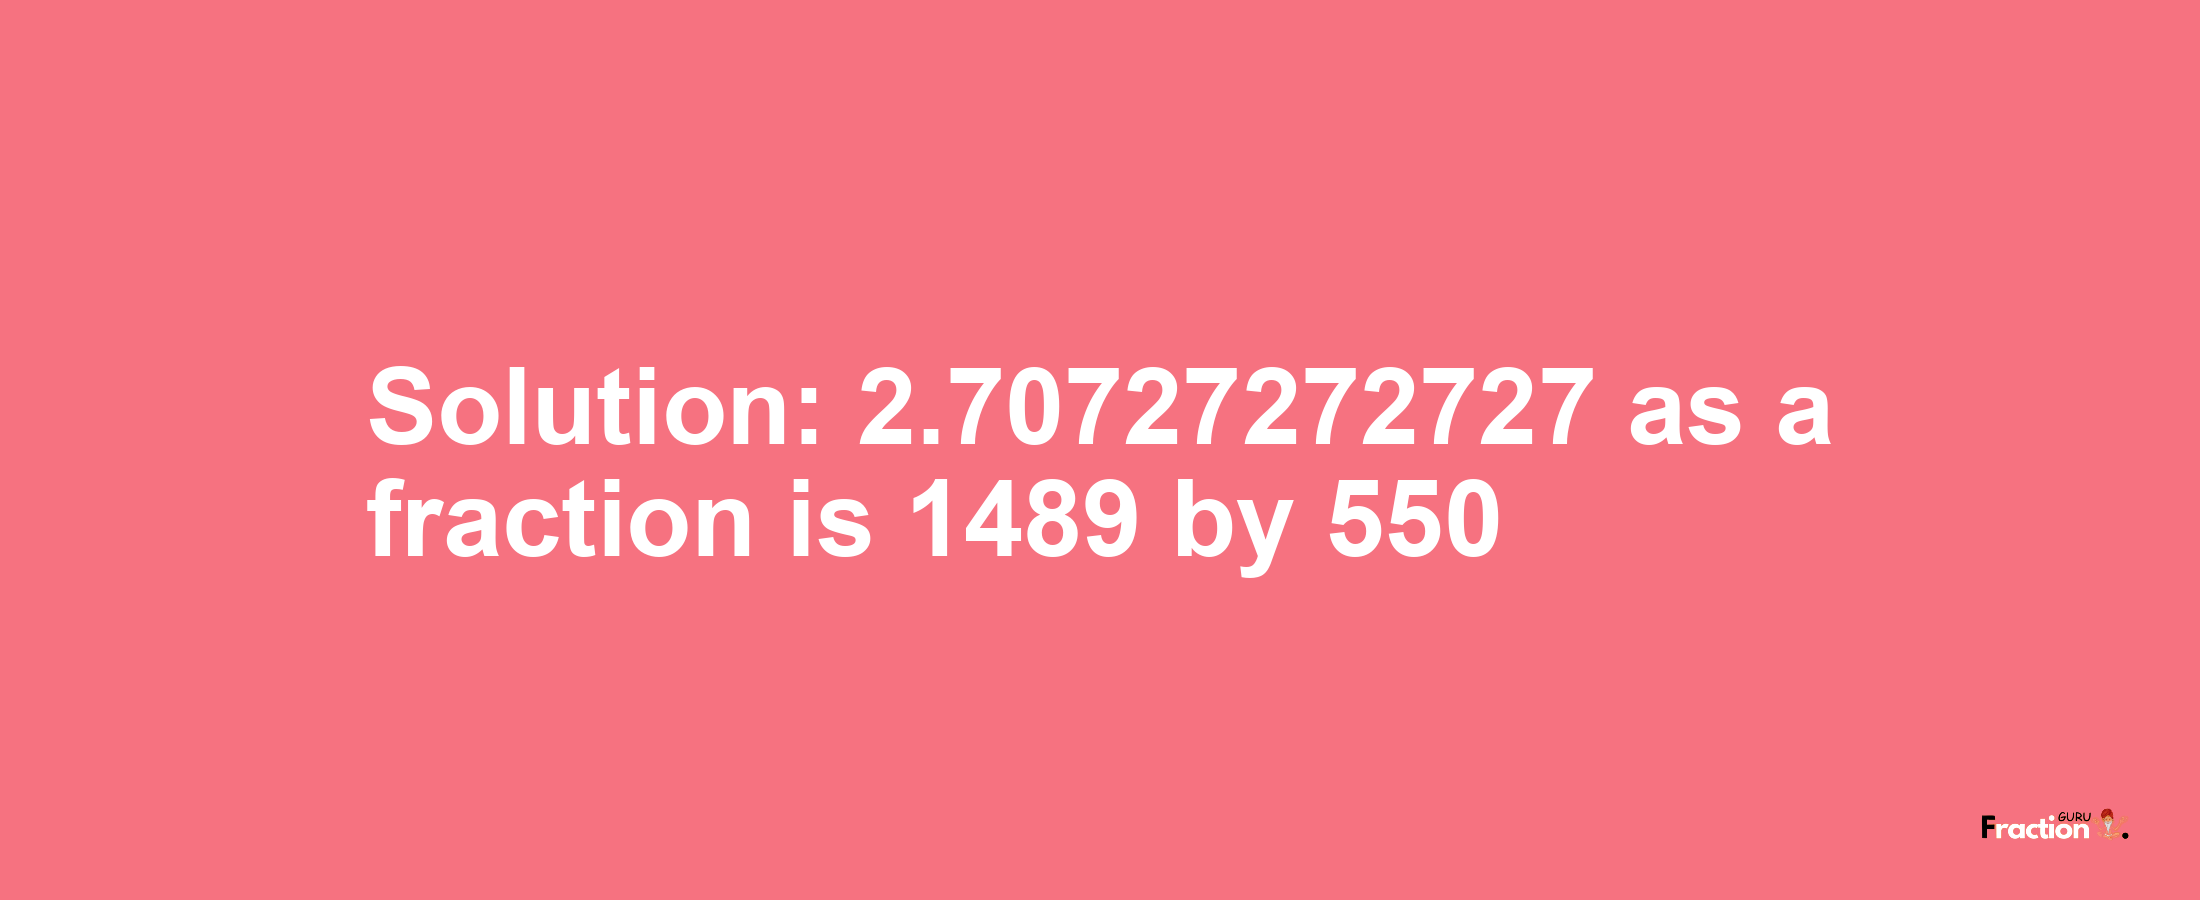 Solution:2.70727272727 as a fraction is 1489/550